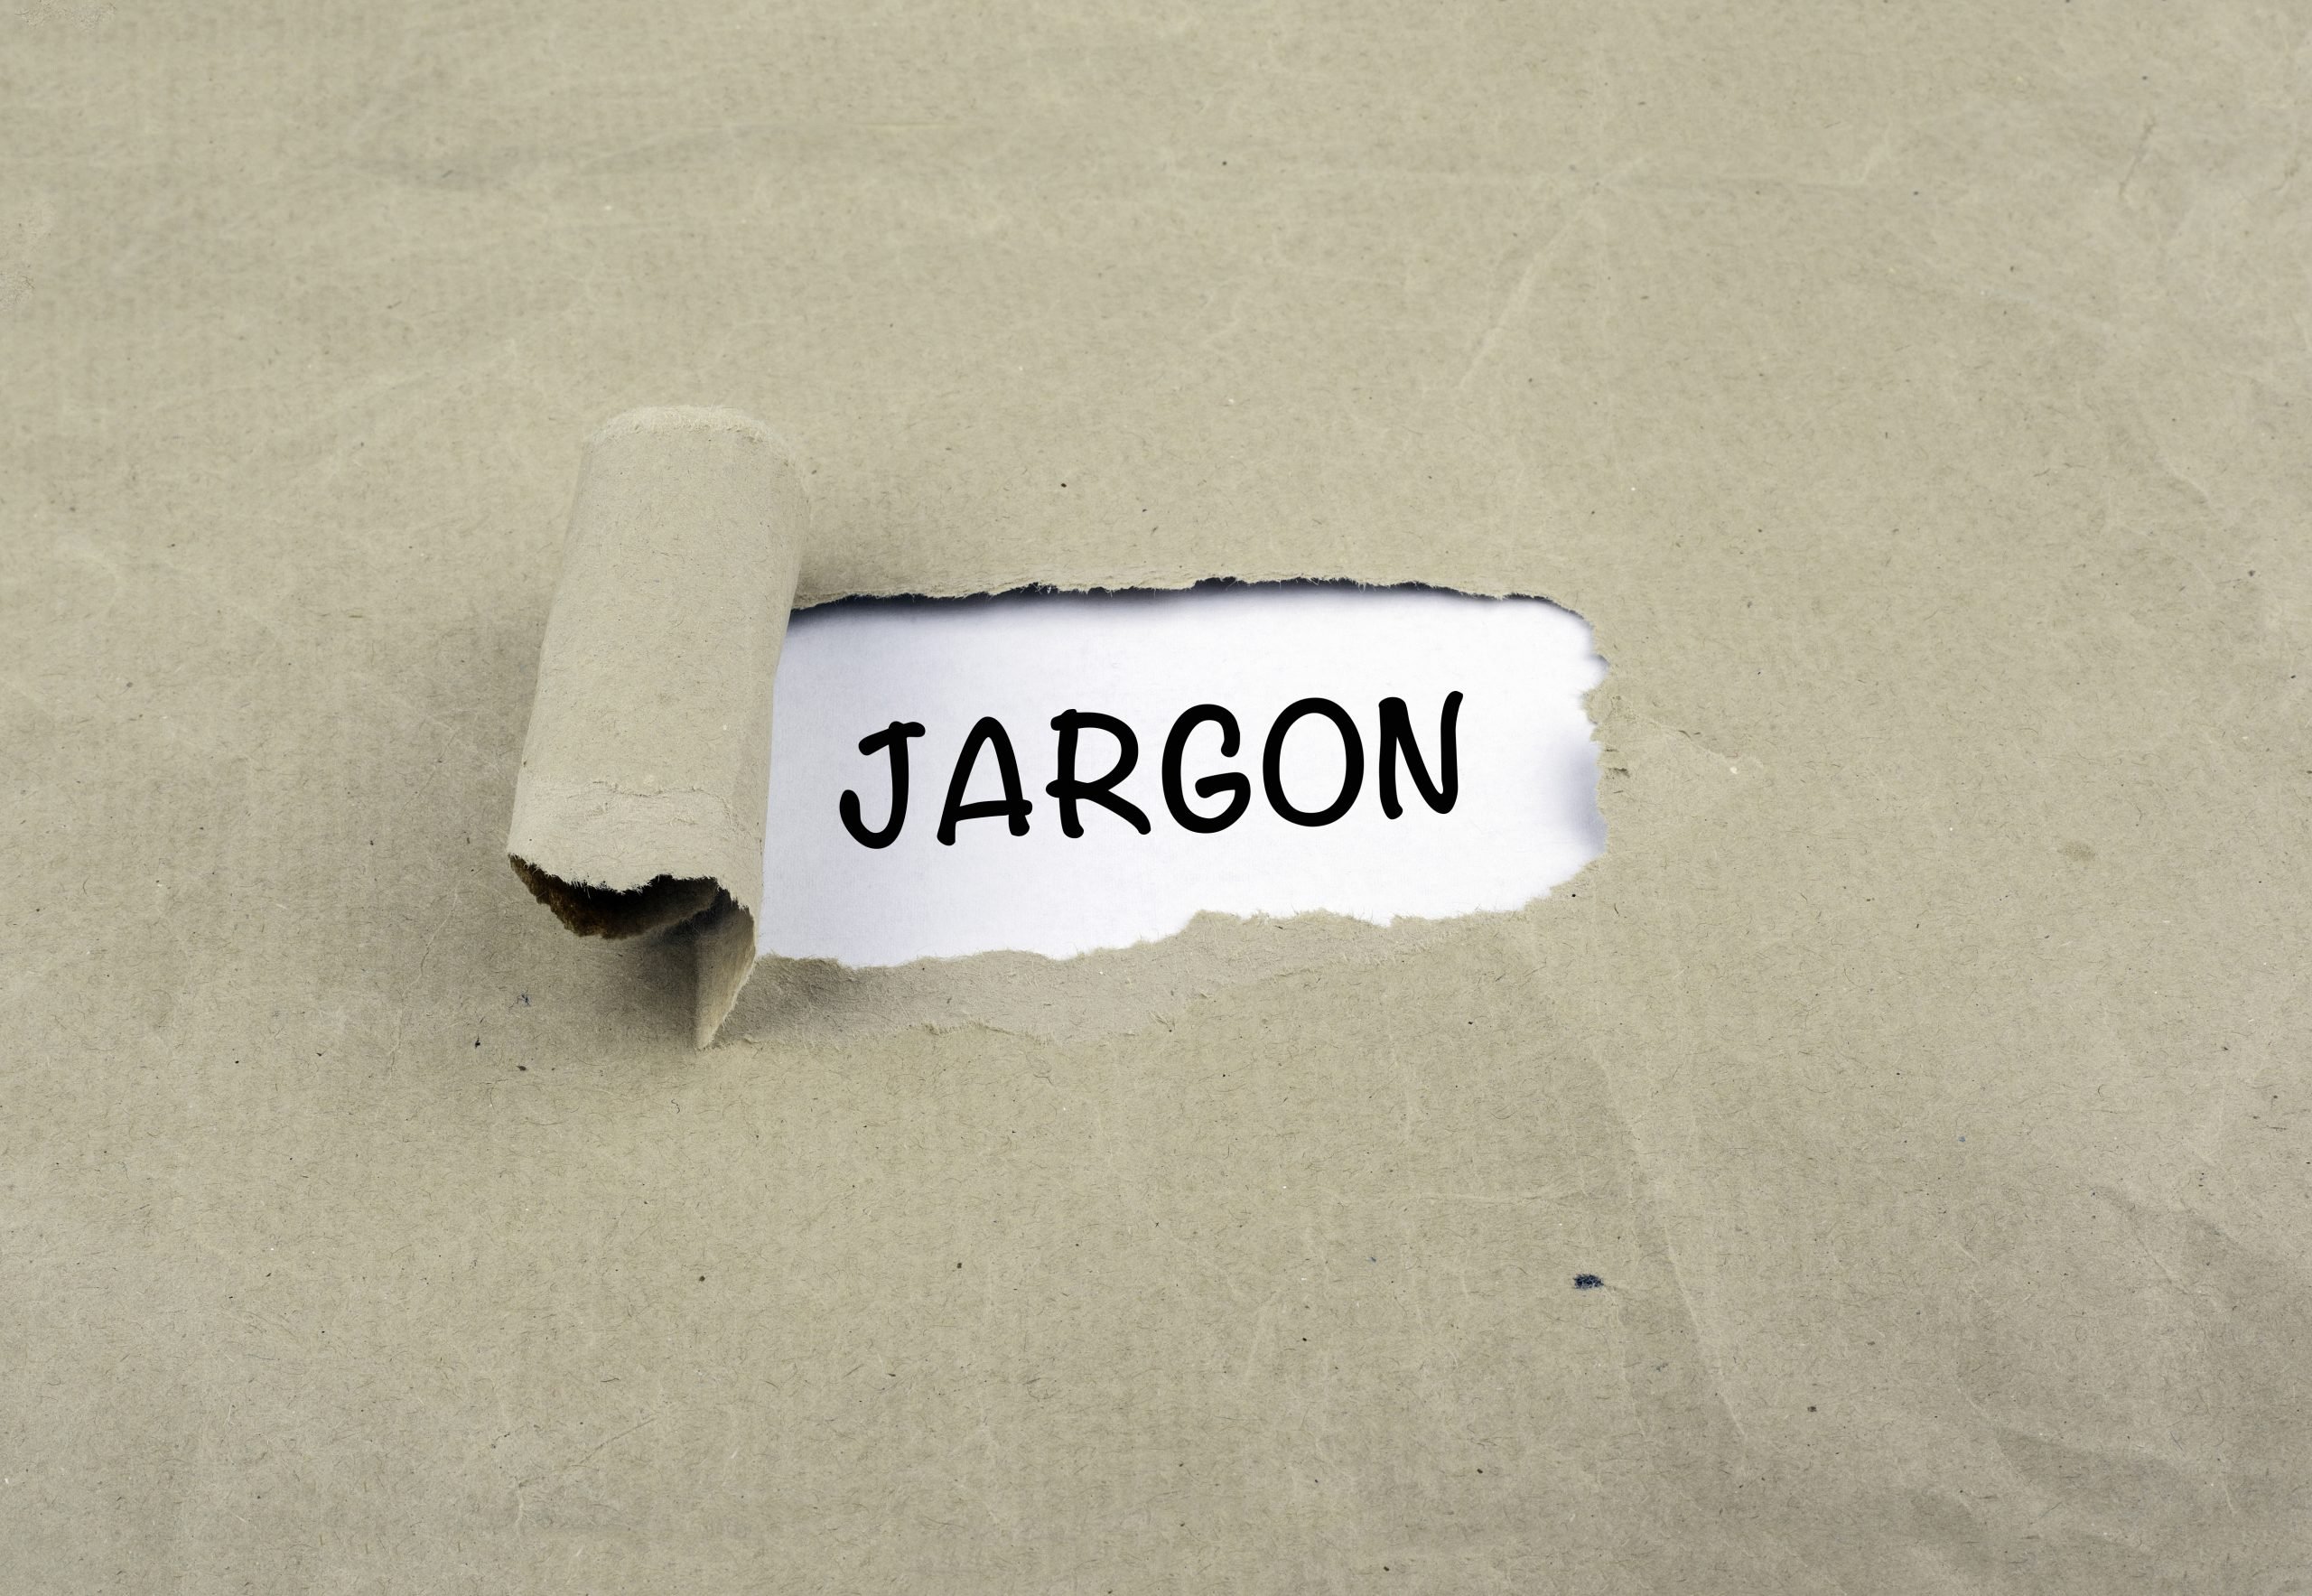 Social Security Jargon: "There are no jobs available in the US economy" ~ What does it mean?